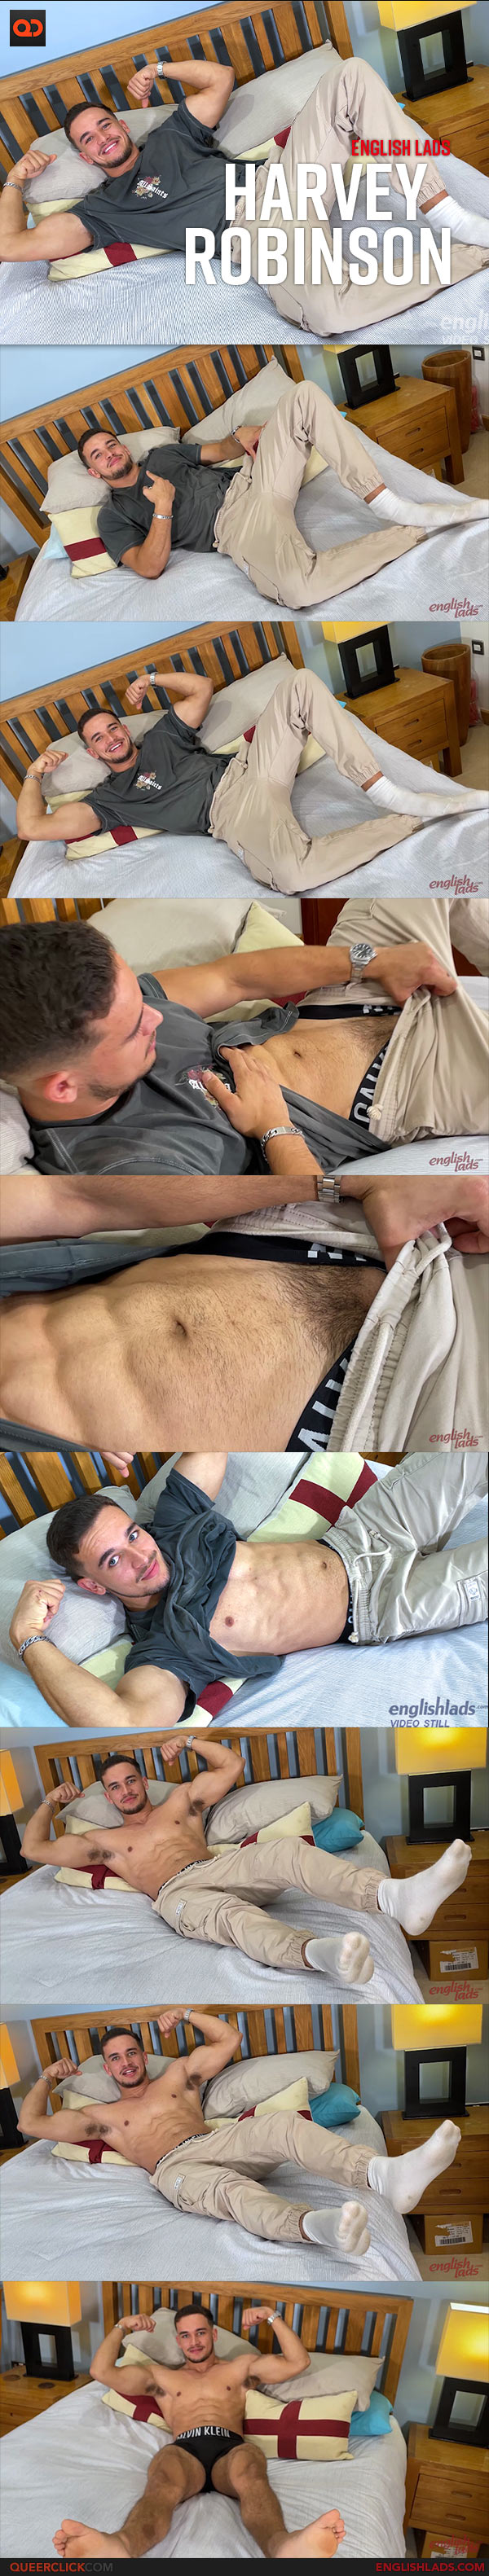 English Lads: Harvey Robinson - Young Ripped Straight Lad Wanks His Huge Uncut Cock and Shows off His Hairy Hole